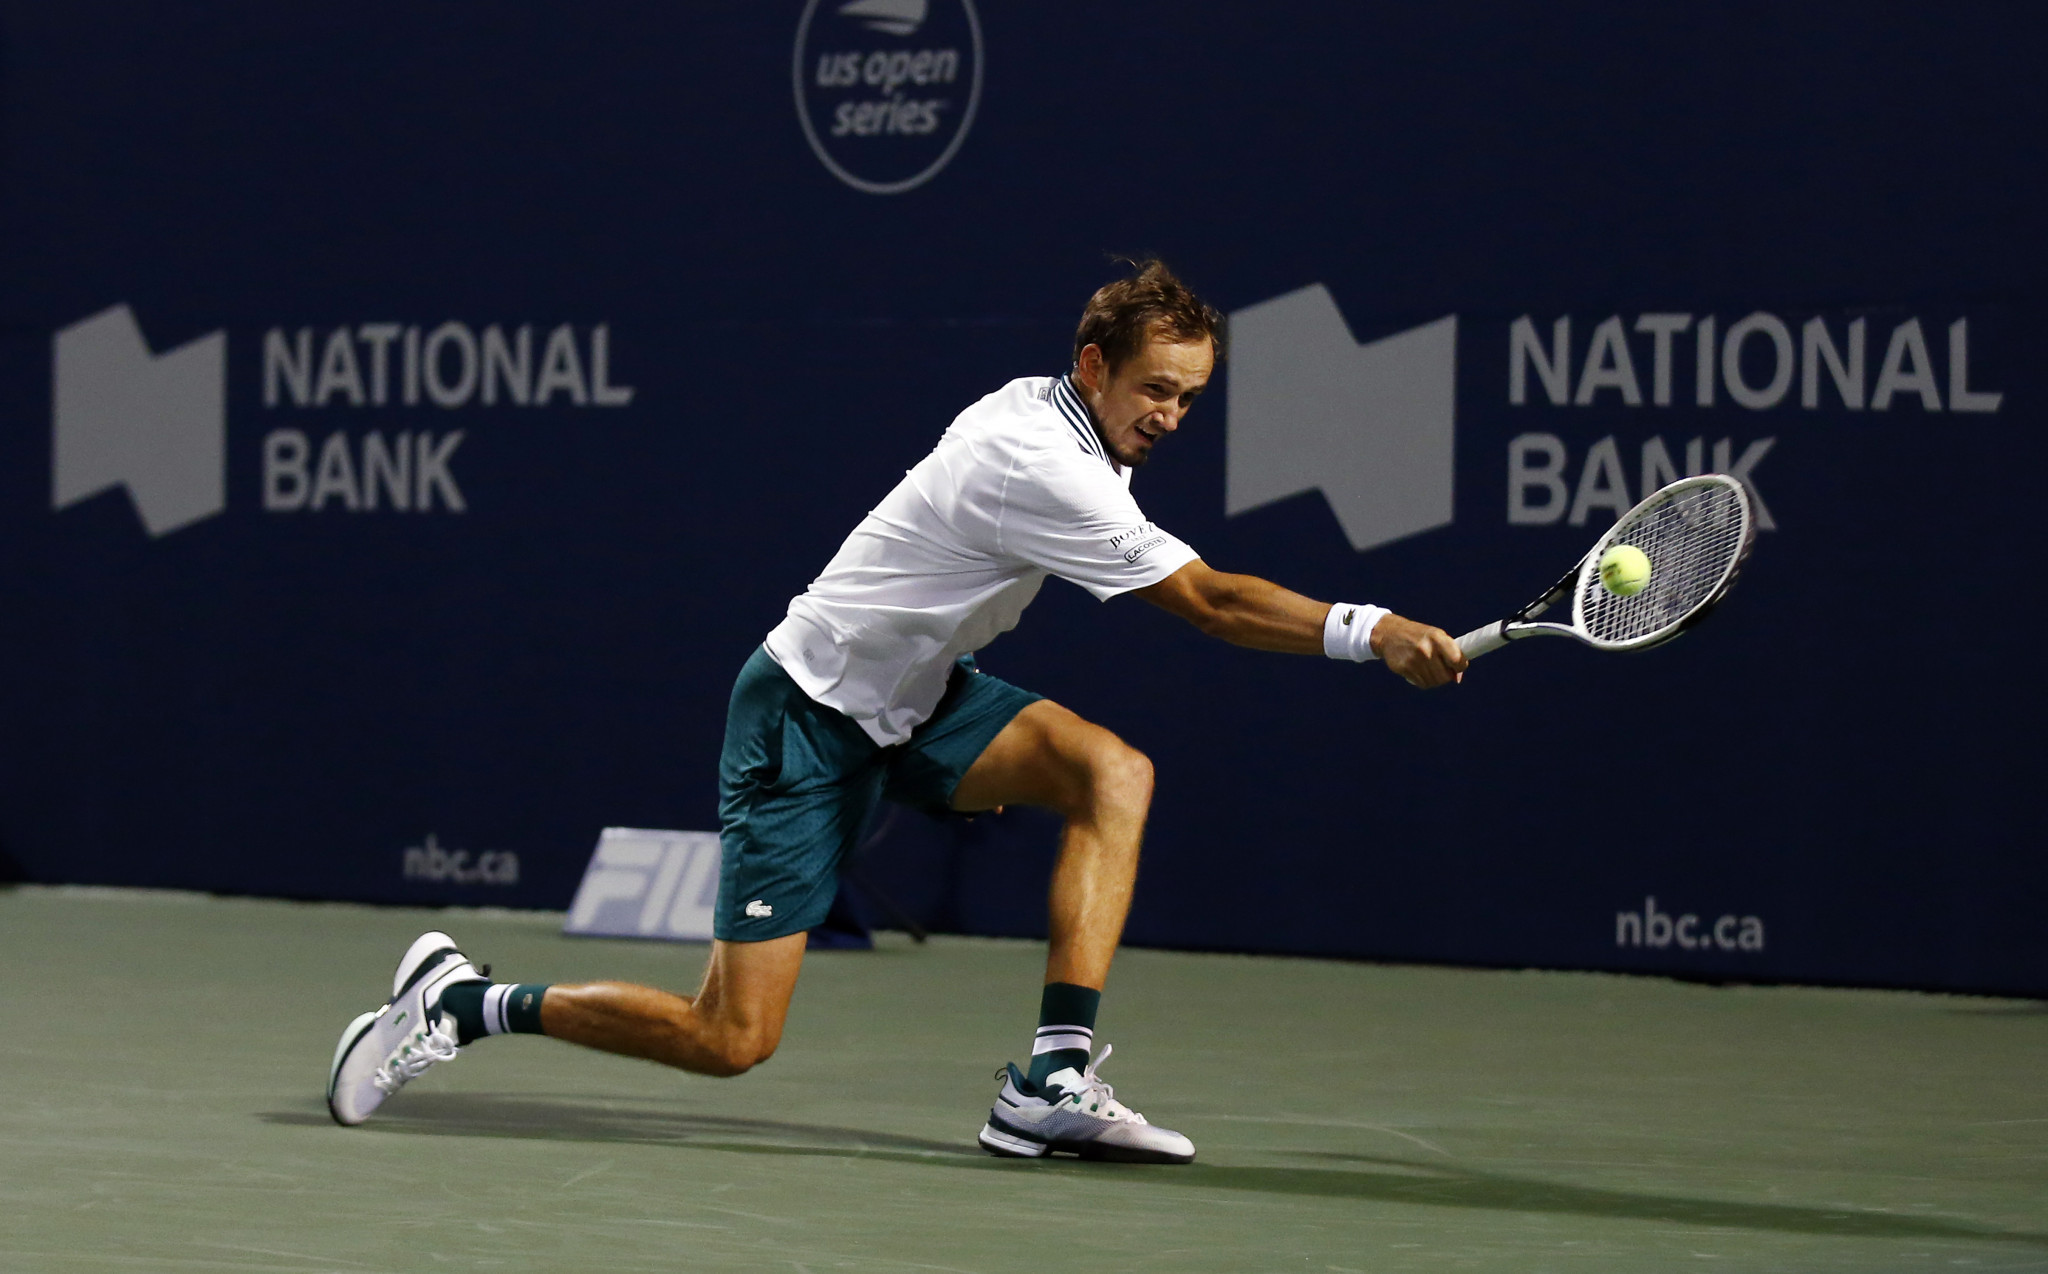 Medvedev fights back to reach Canadian Open semi-finals